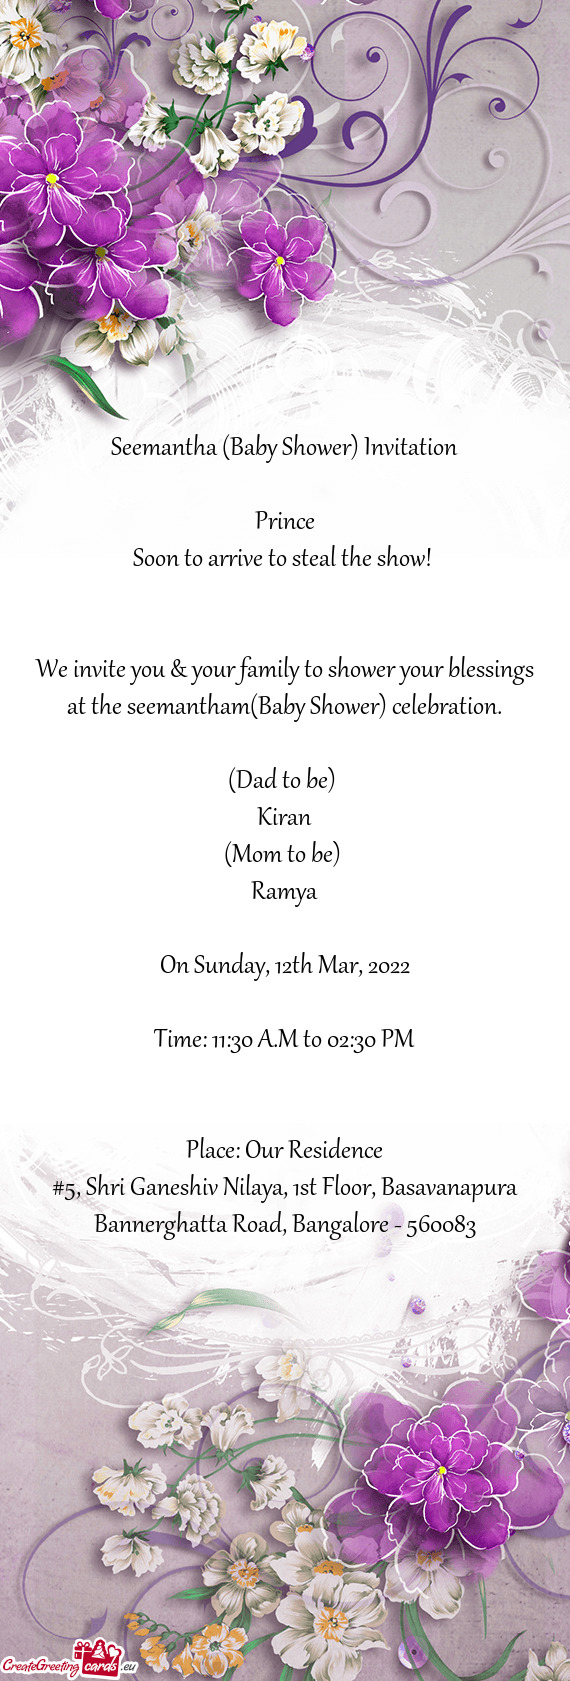 We invite you & your family to shower your blessings at the seemantham(Baby Shower) celebration